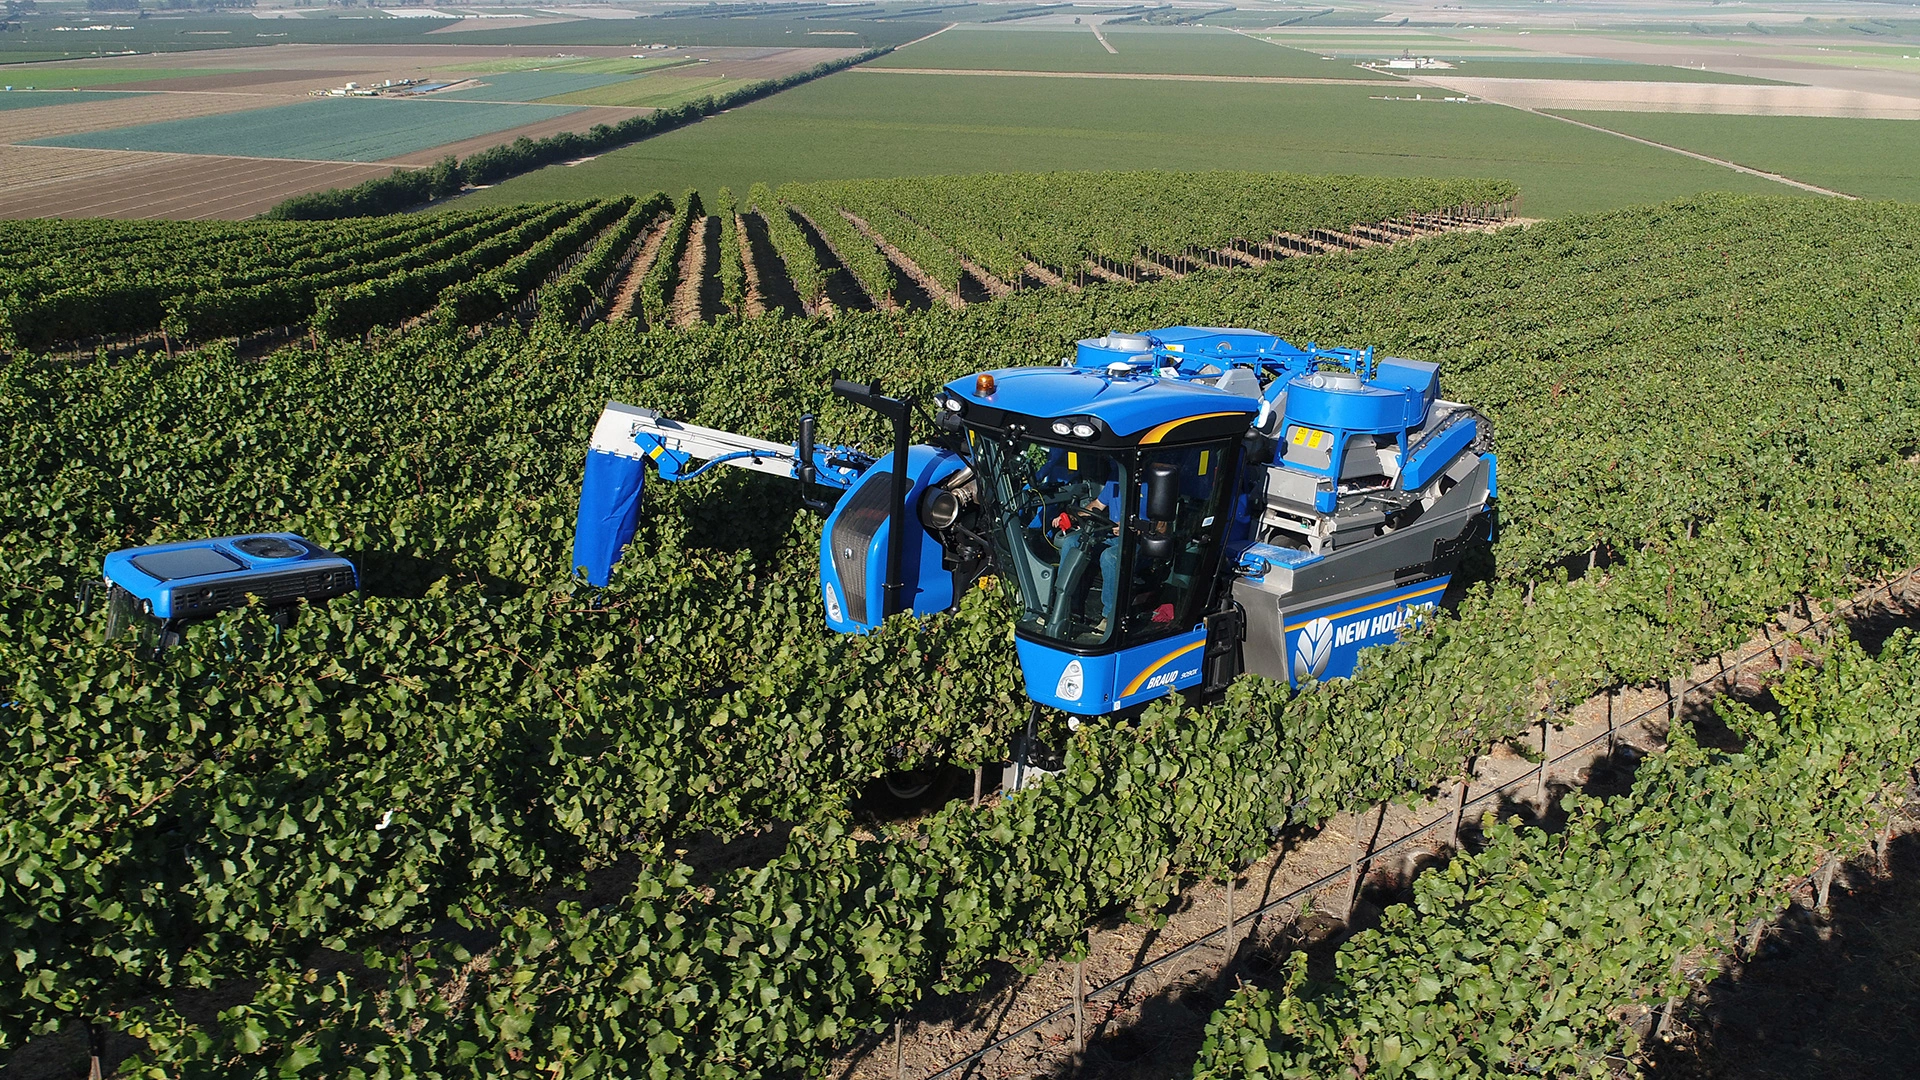 BRAUD 9090X Grape Harvester working on the field